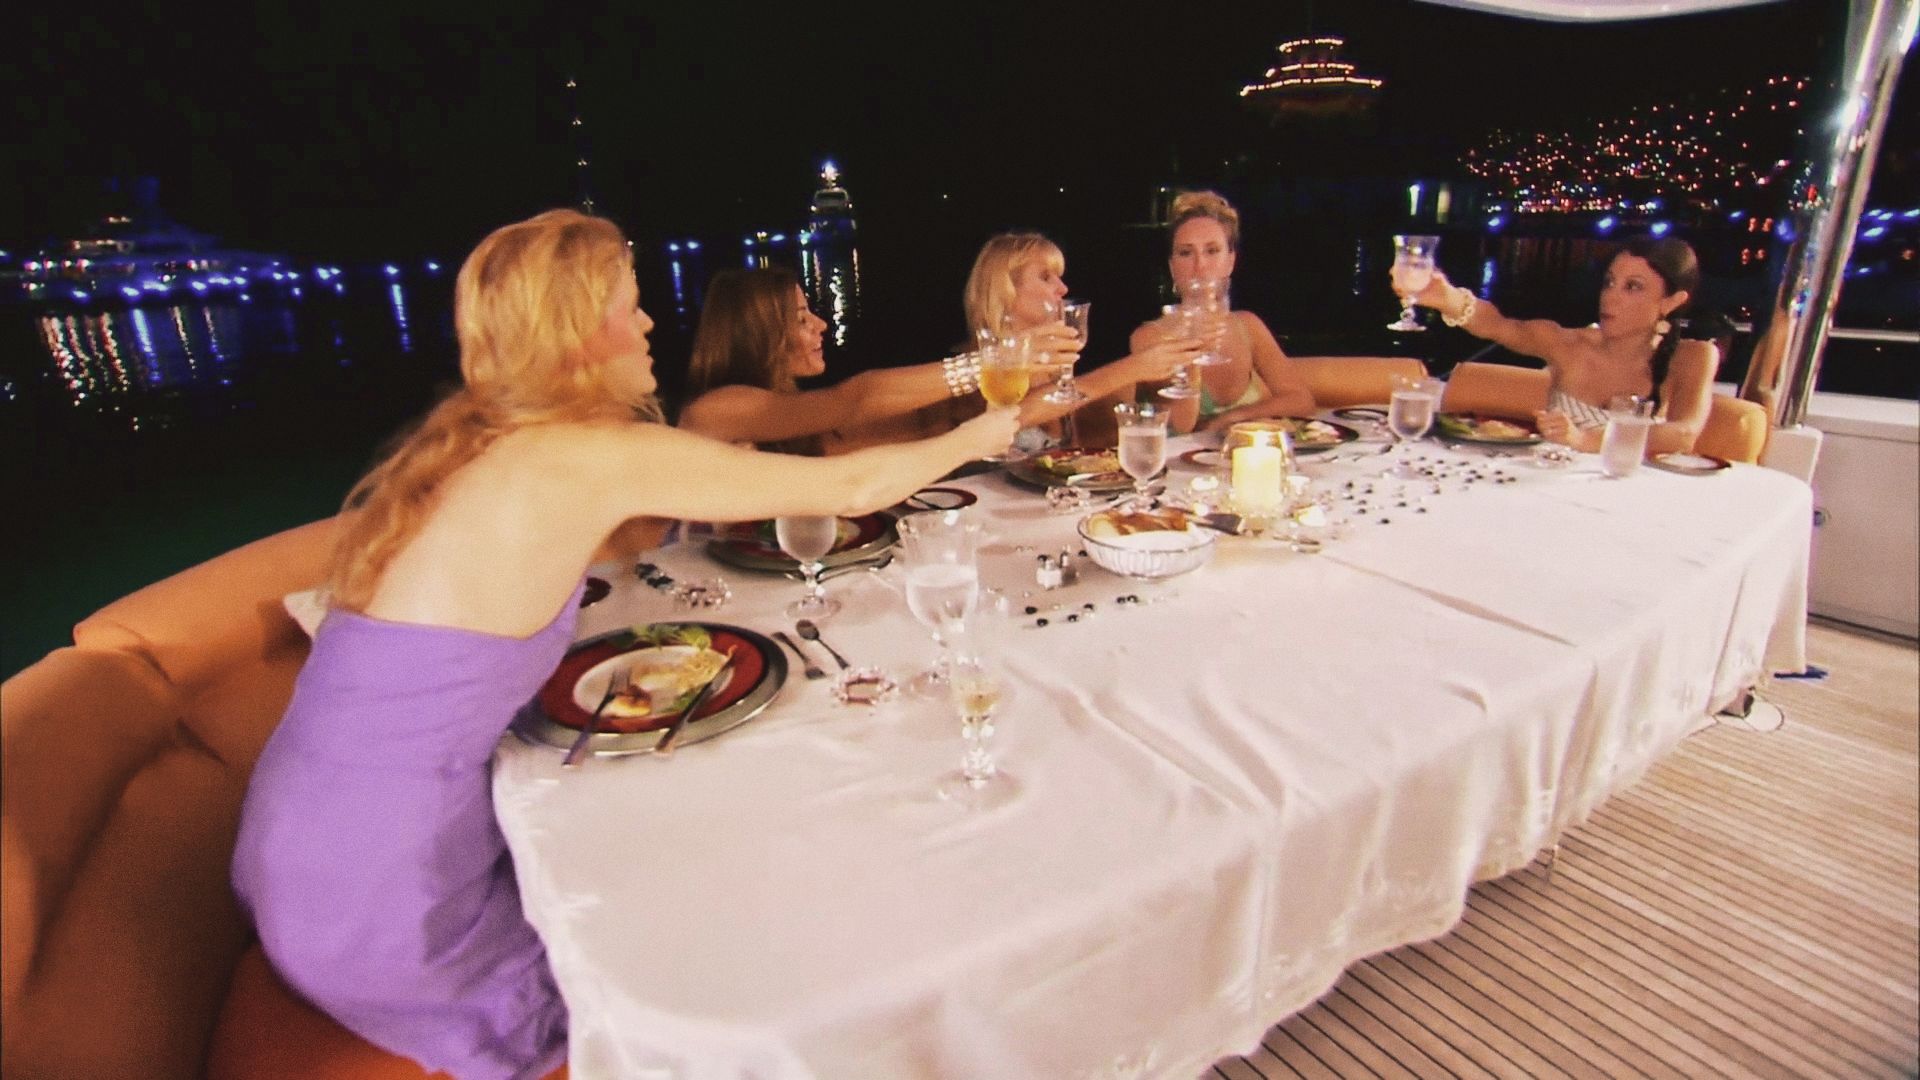 RHONY The Real Housewives of New York City S03E11 saison 3 épisode 11 Housewives Overboard